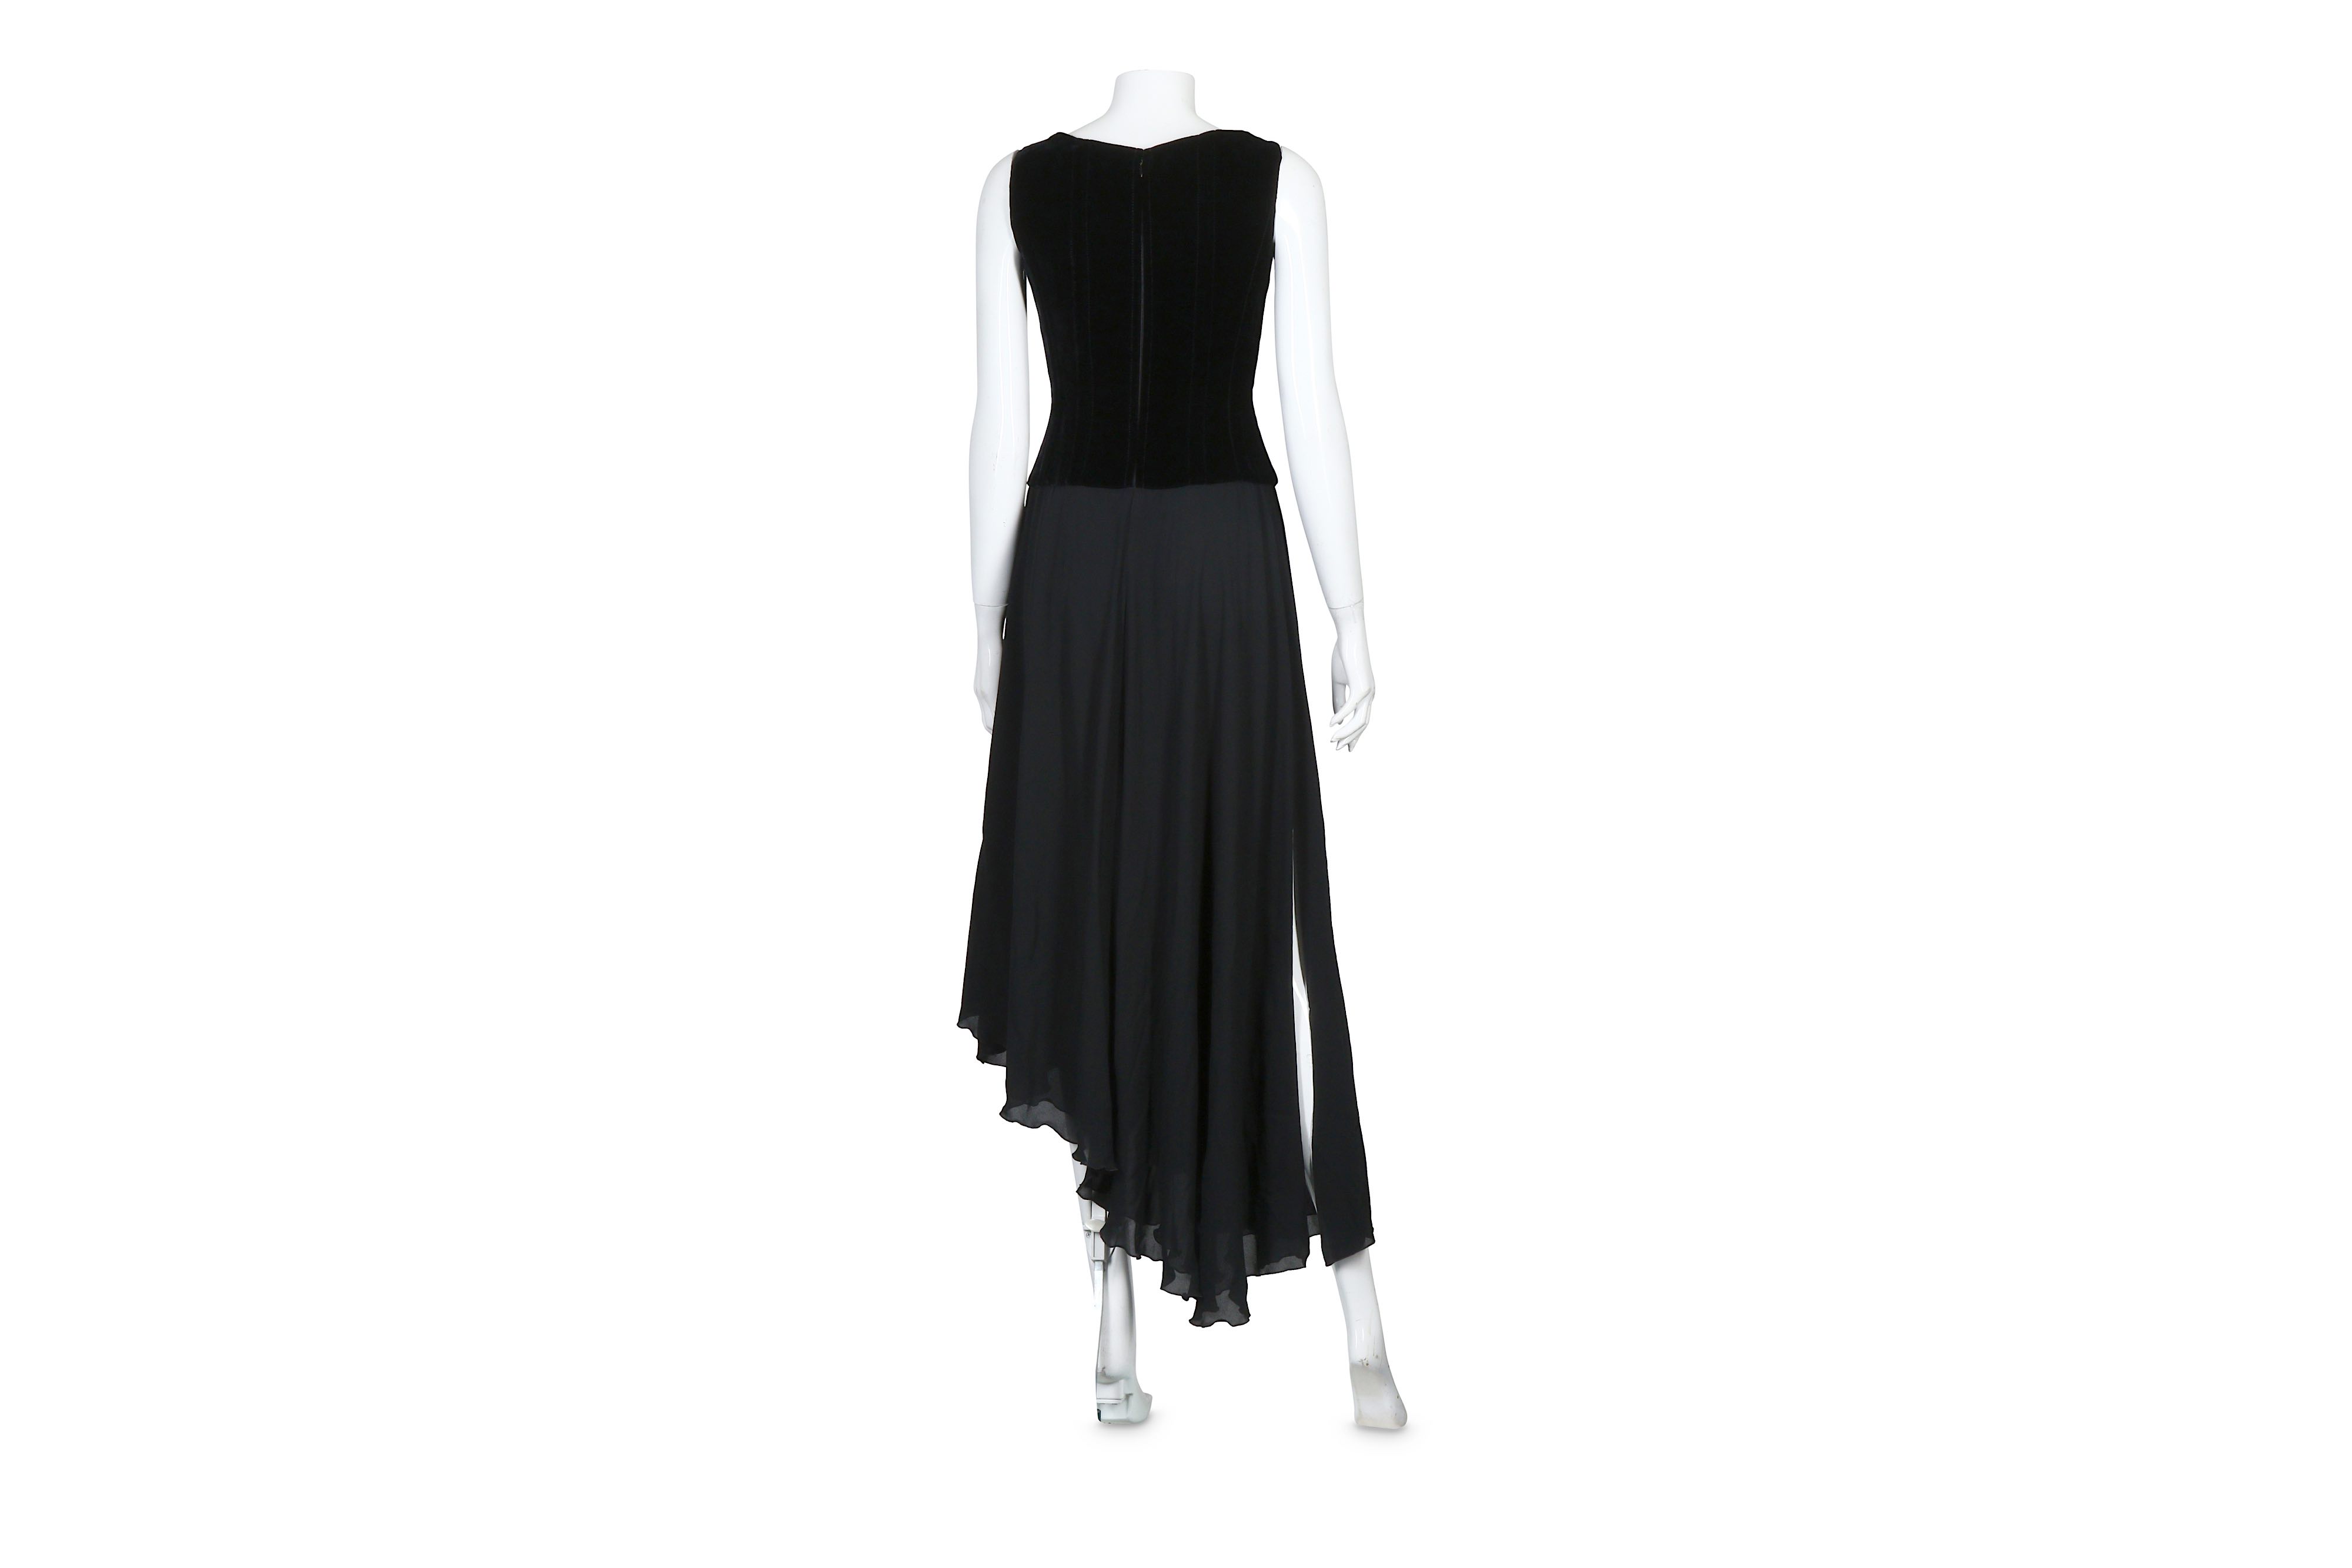 Chanel Black Velvet and Chiffon Fitted Dress - size 38 - Image 4 of 5